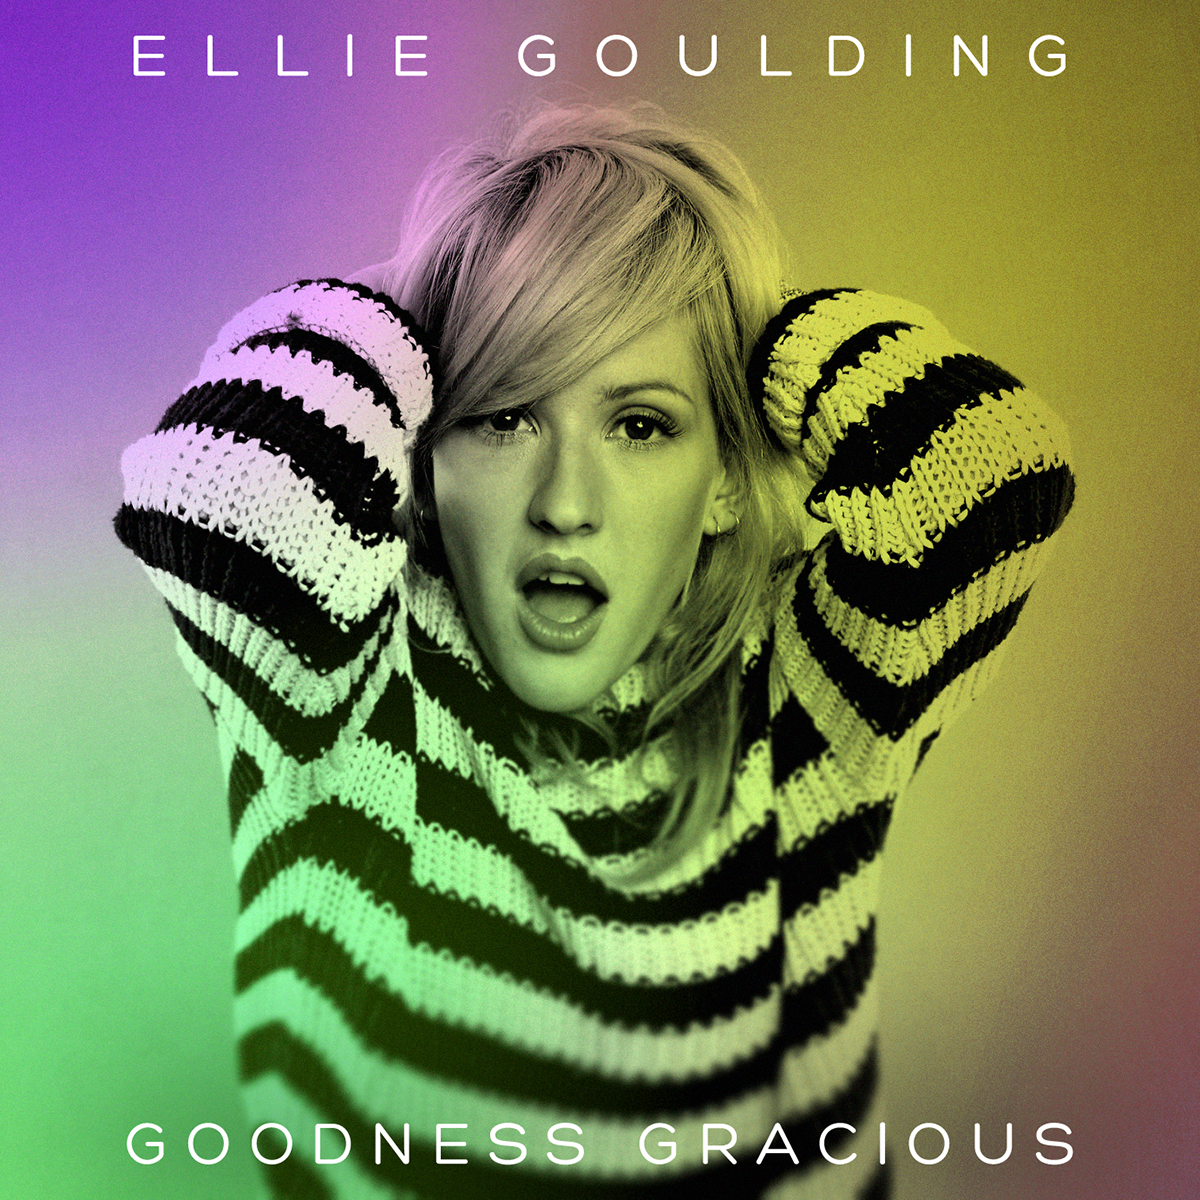 Ellie-Goulding-Goodness-Gracious-made-by-RCMusic